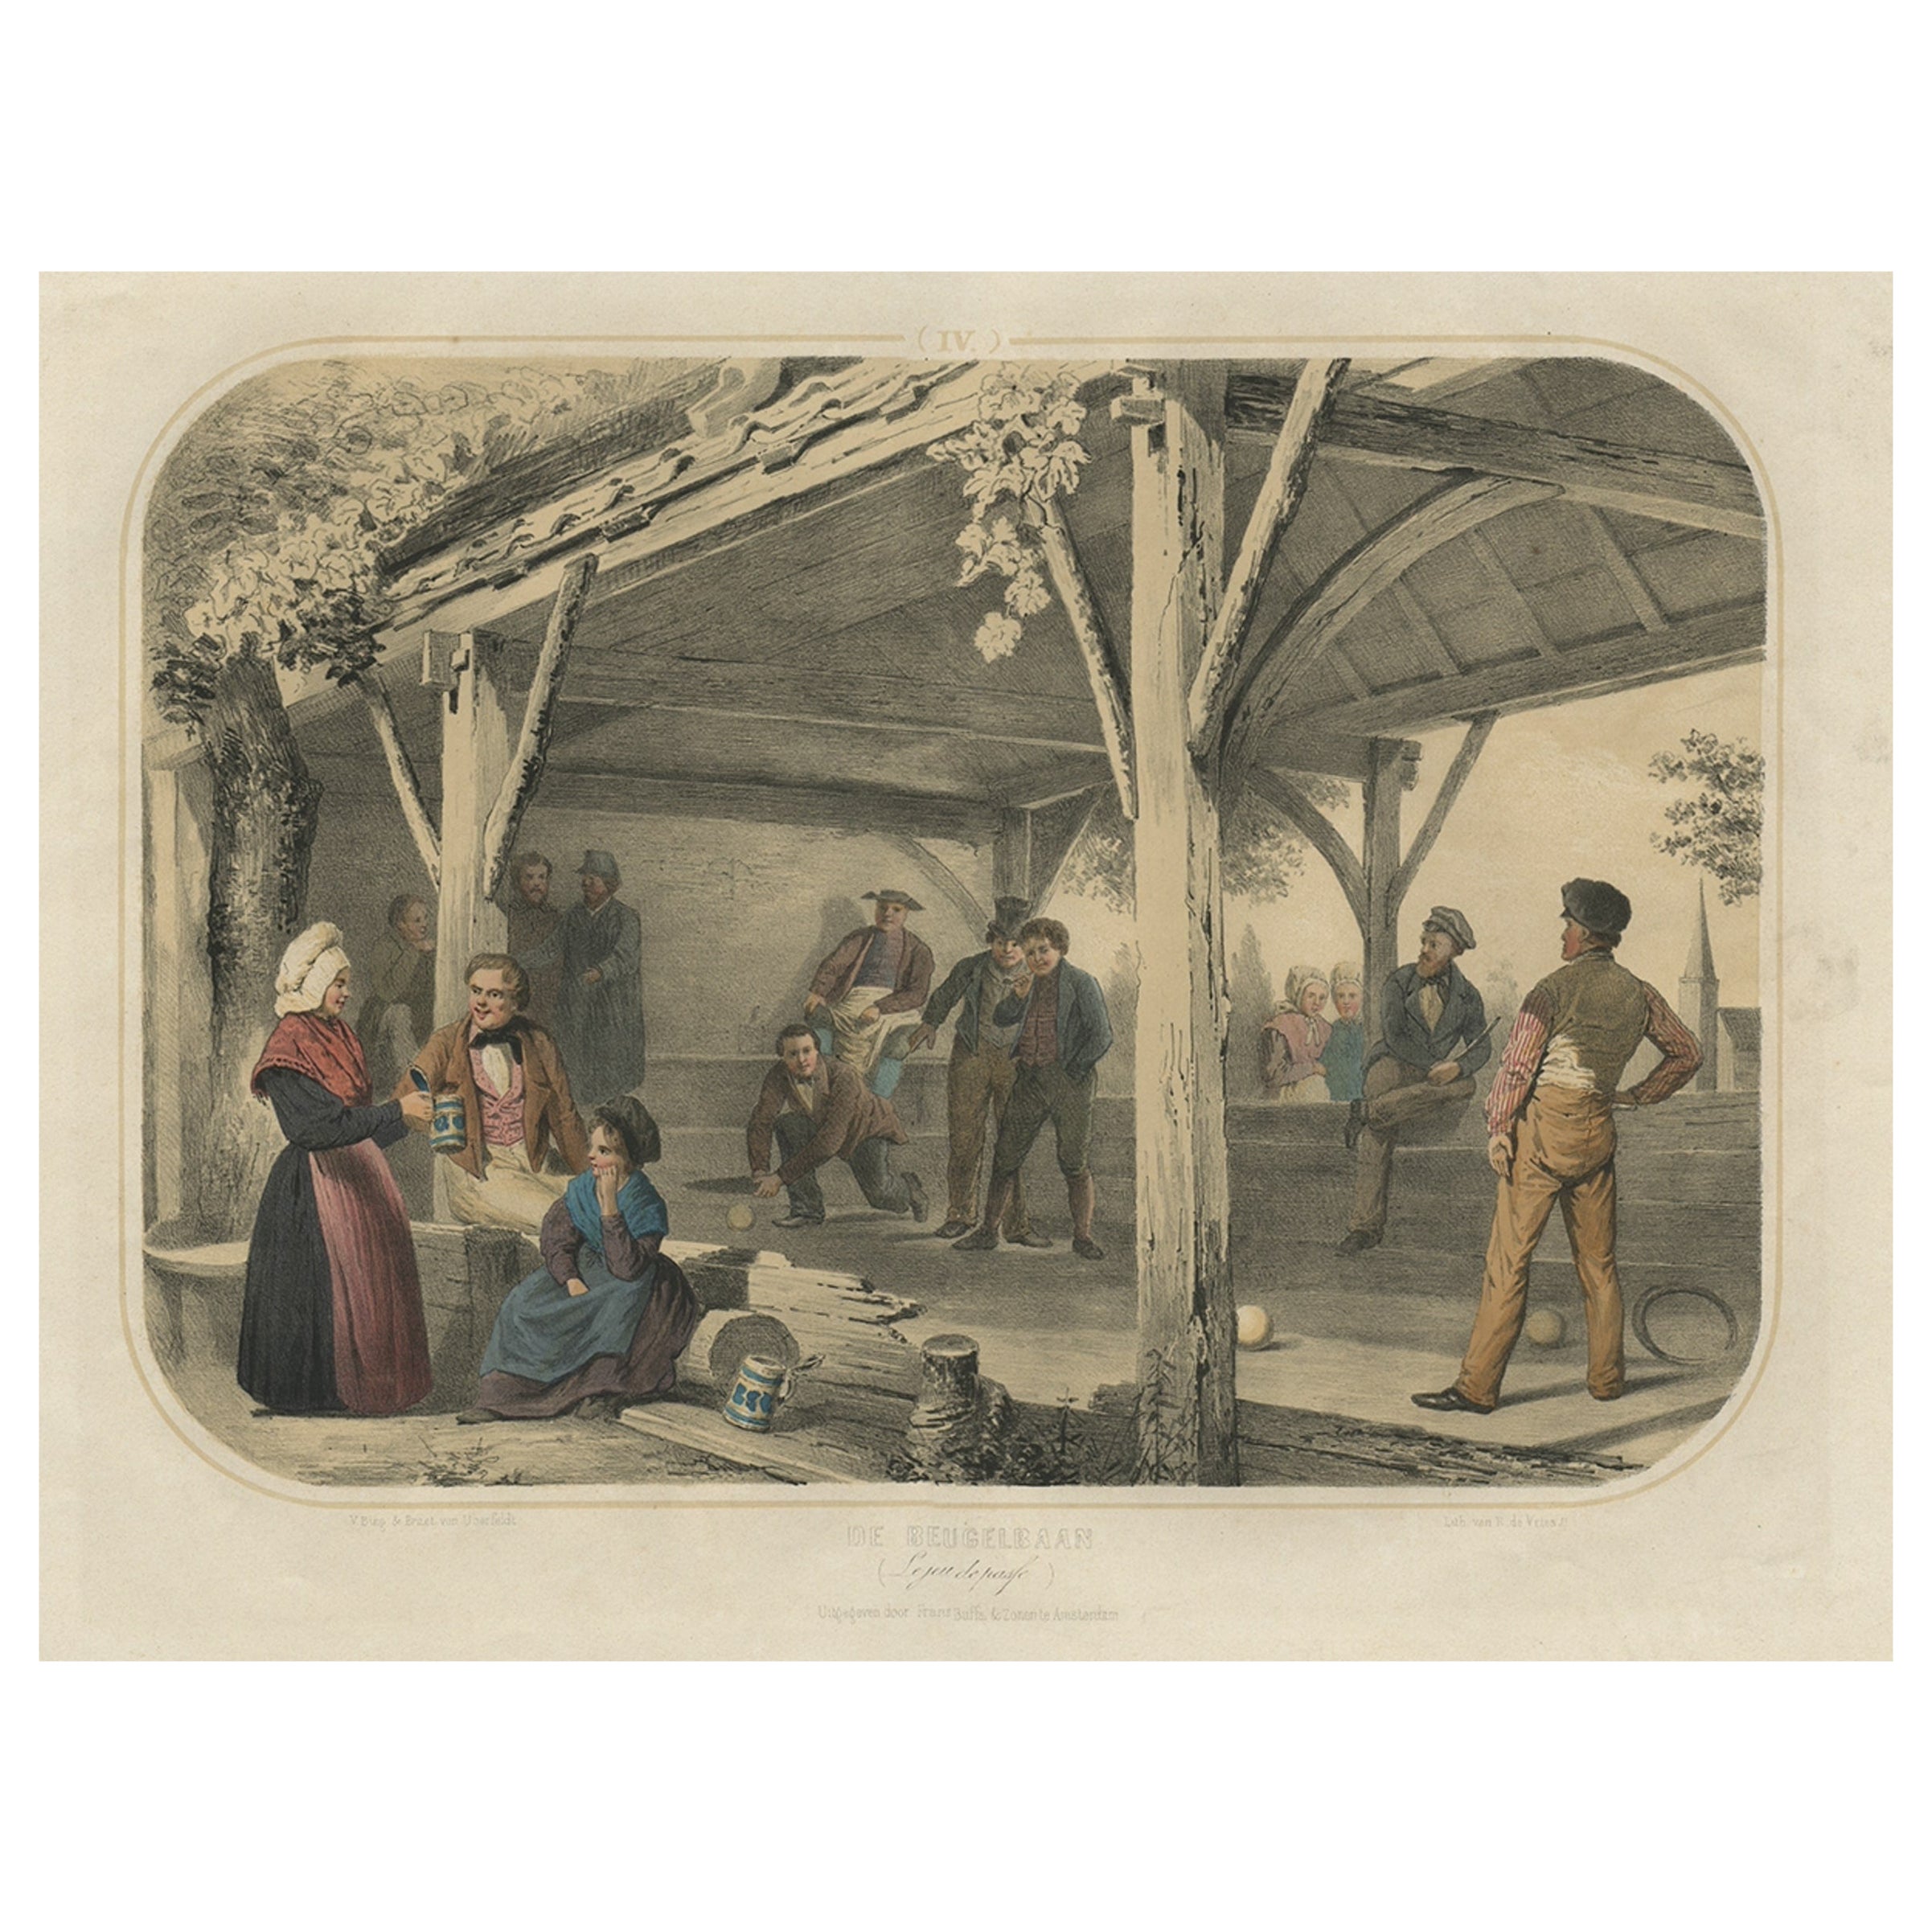 Old Print of 'Beugelen', One of the Oldest Ball Sports in The Netherlands, 1857